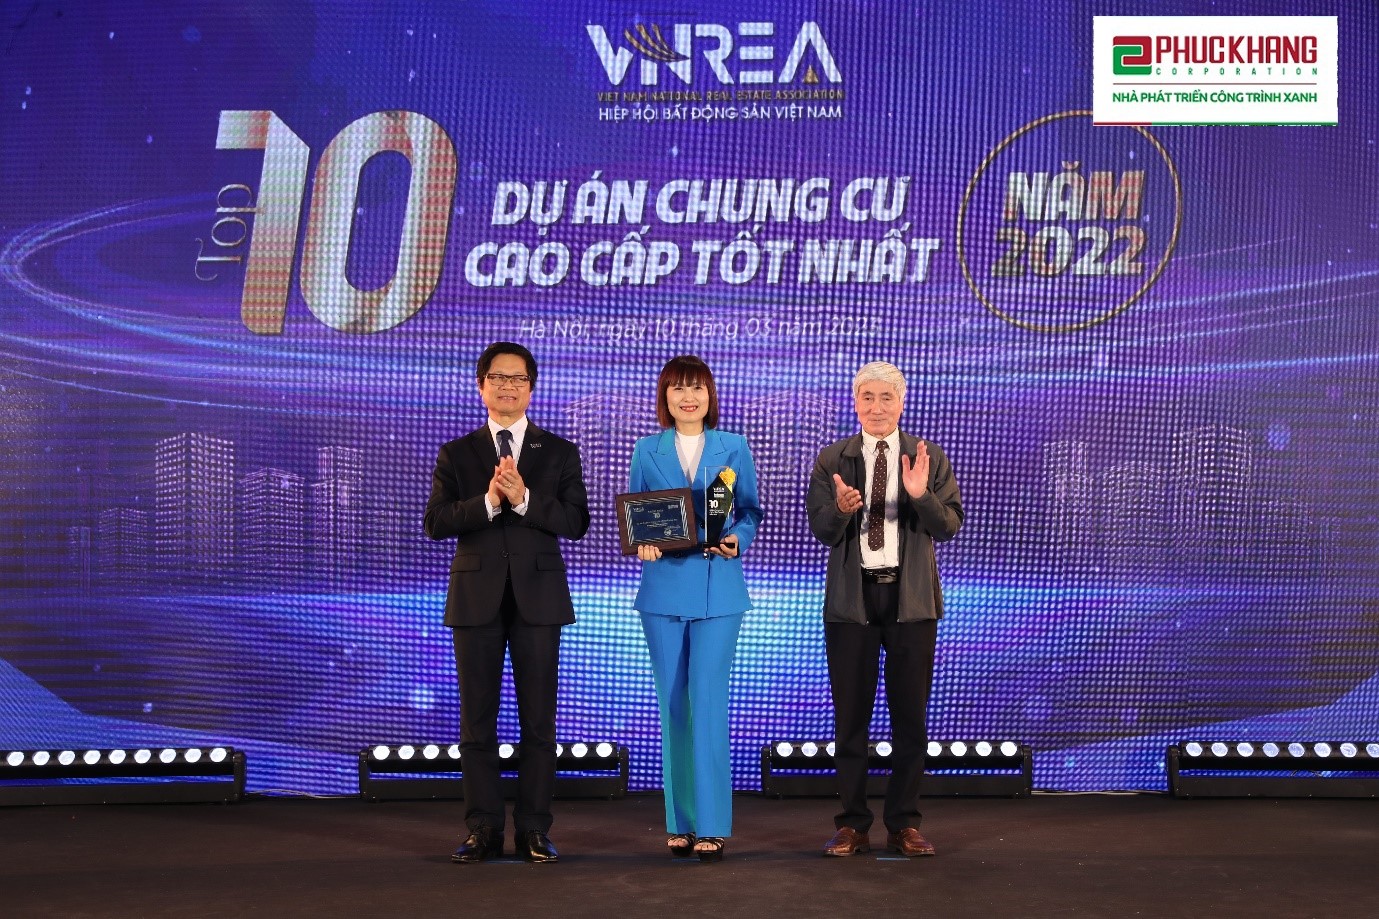 Representative of Phuc Khang Corporation (in the middle) received the award "Top 10 best luxury apartment projects in 2022" for the green building Diamond Lotus Riverside